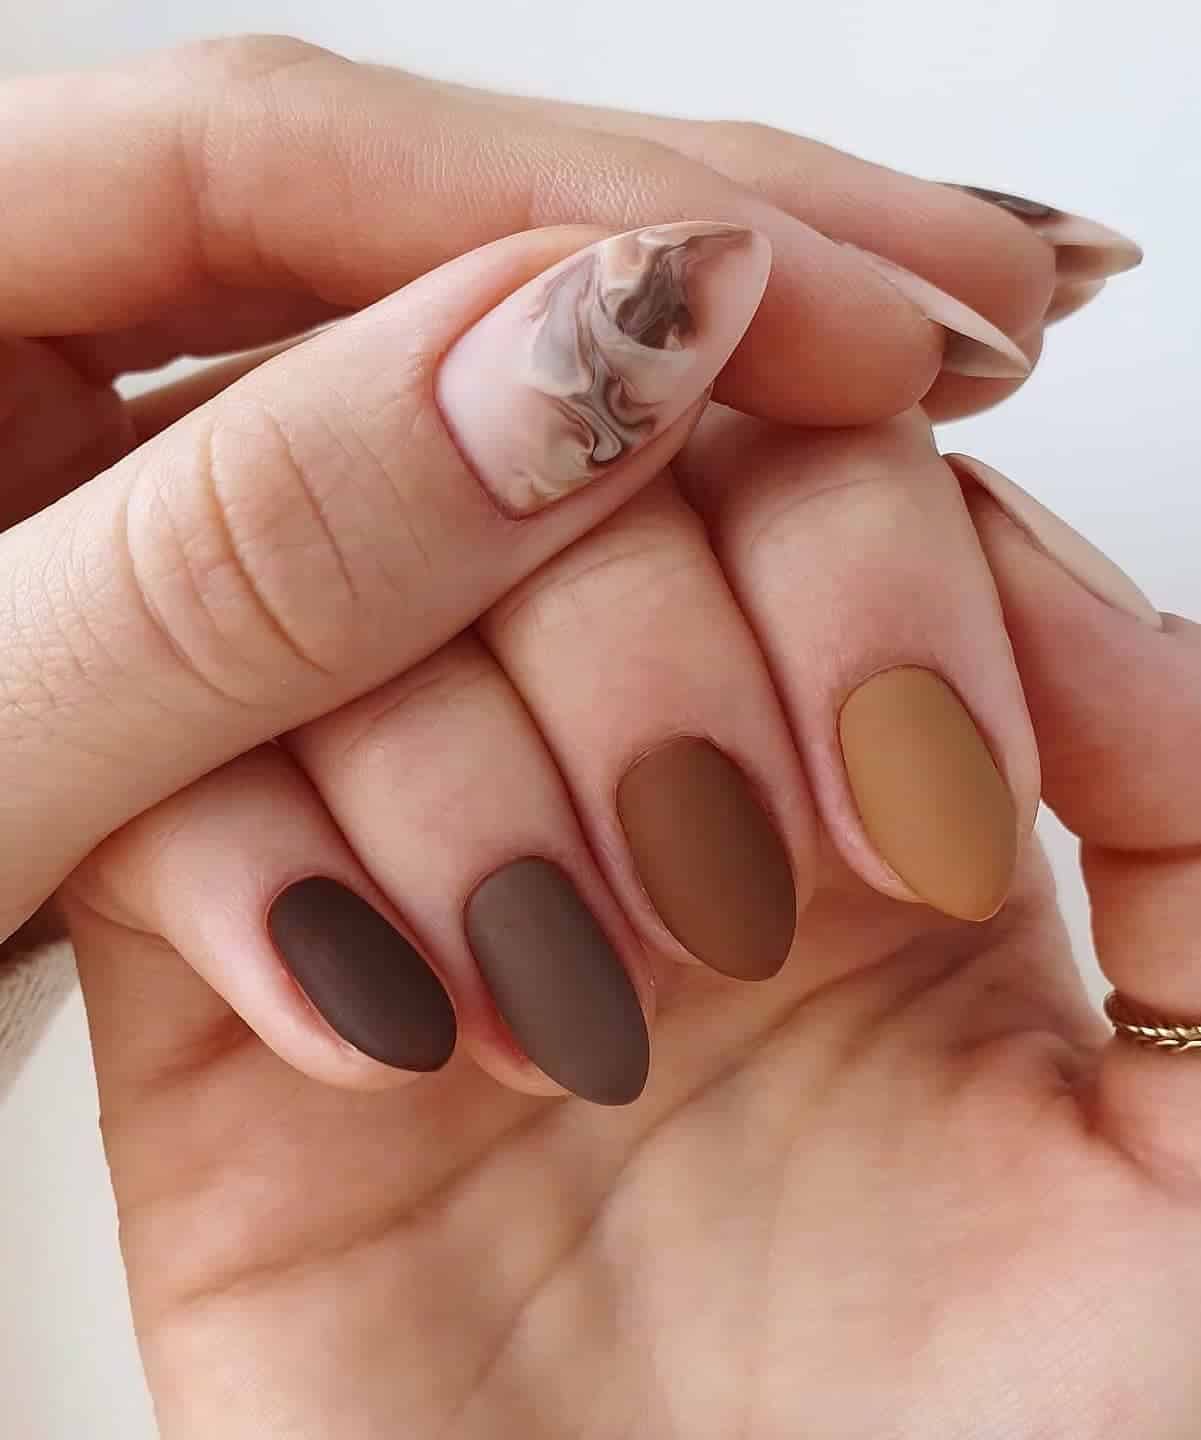 Two hands with short stiletto nails, one painted a brown and beige matte gradient design and the other with white and brown marbled polish